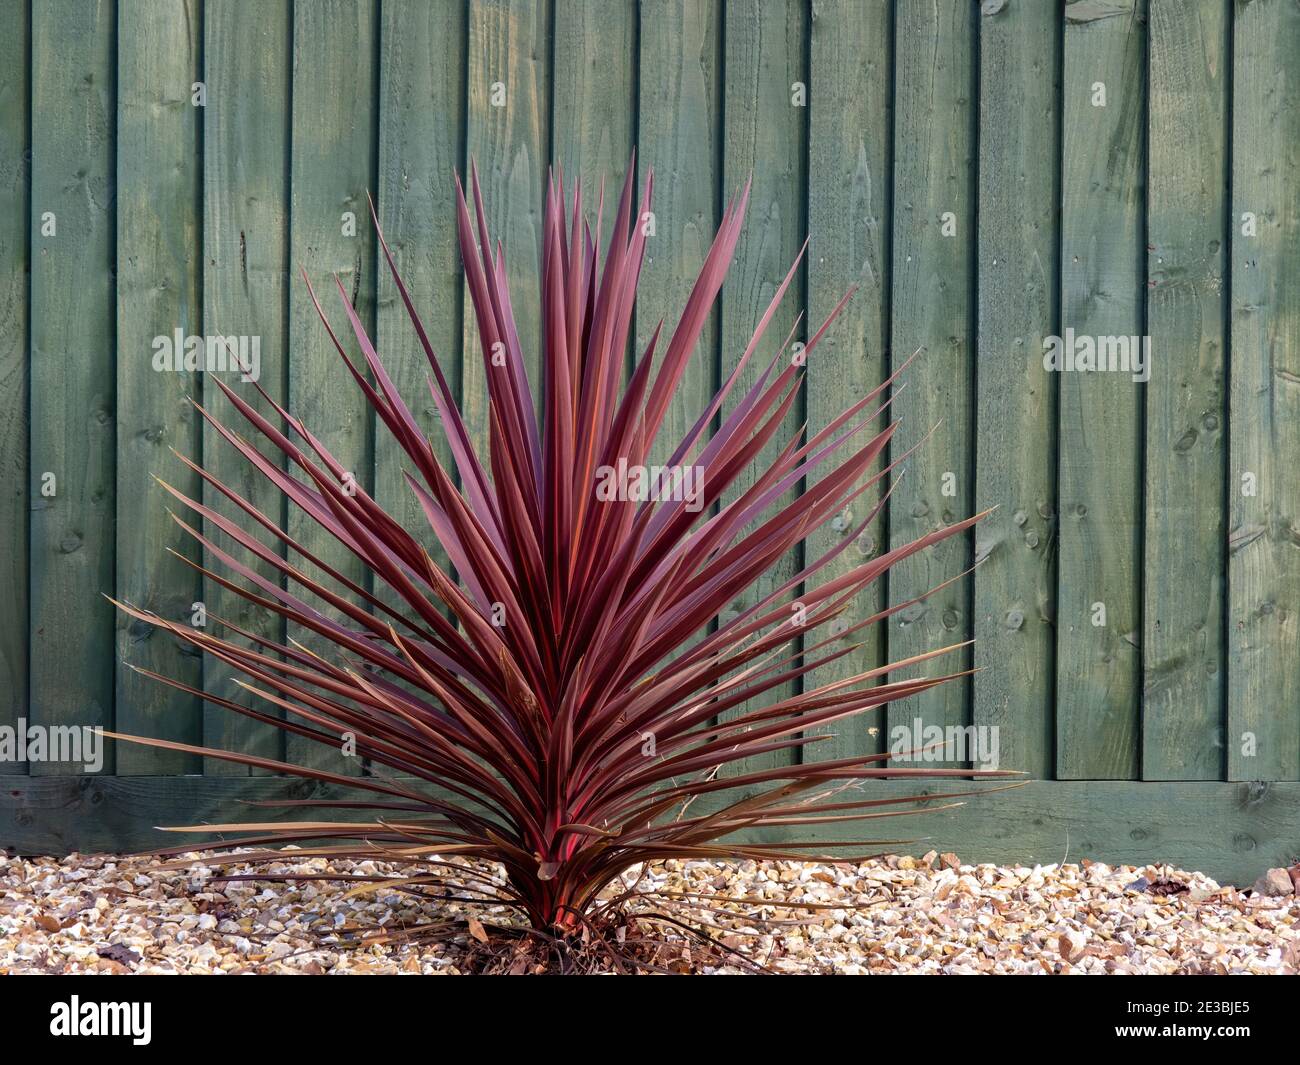 Beautiful red cordyline plant by fence, outdoors. Stock Photo